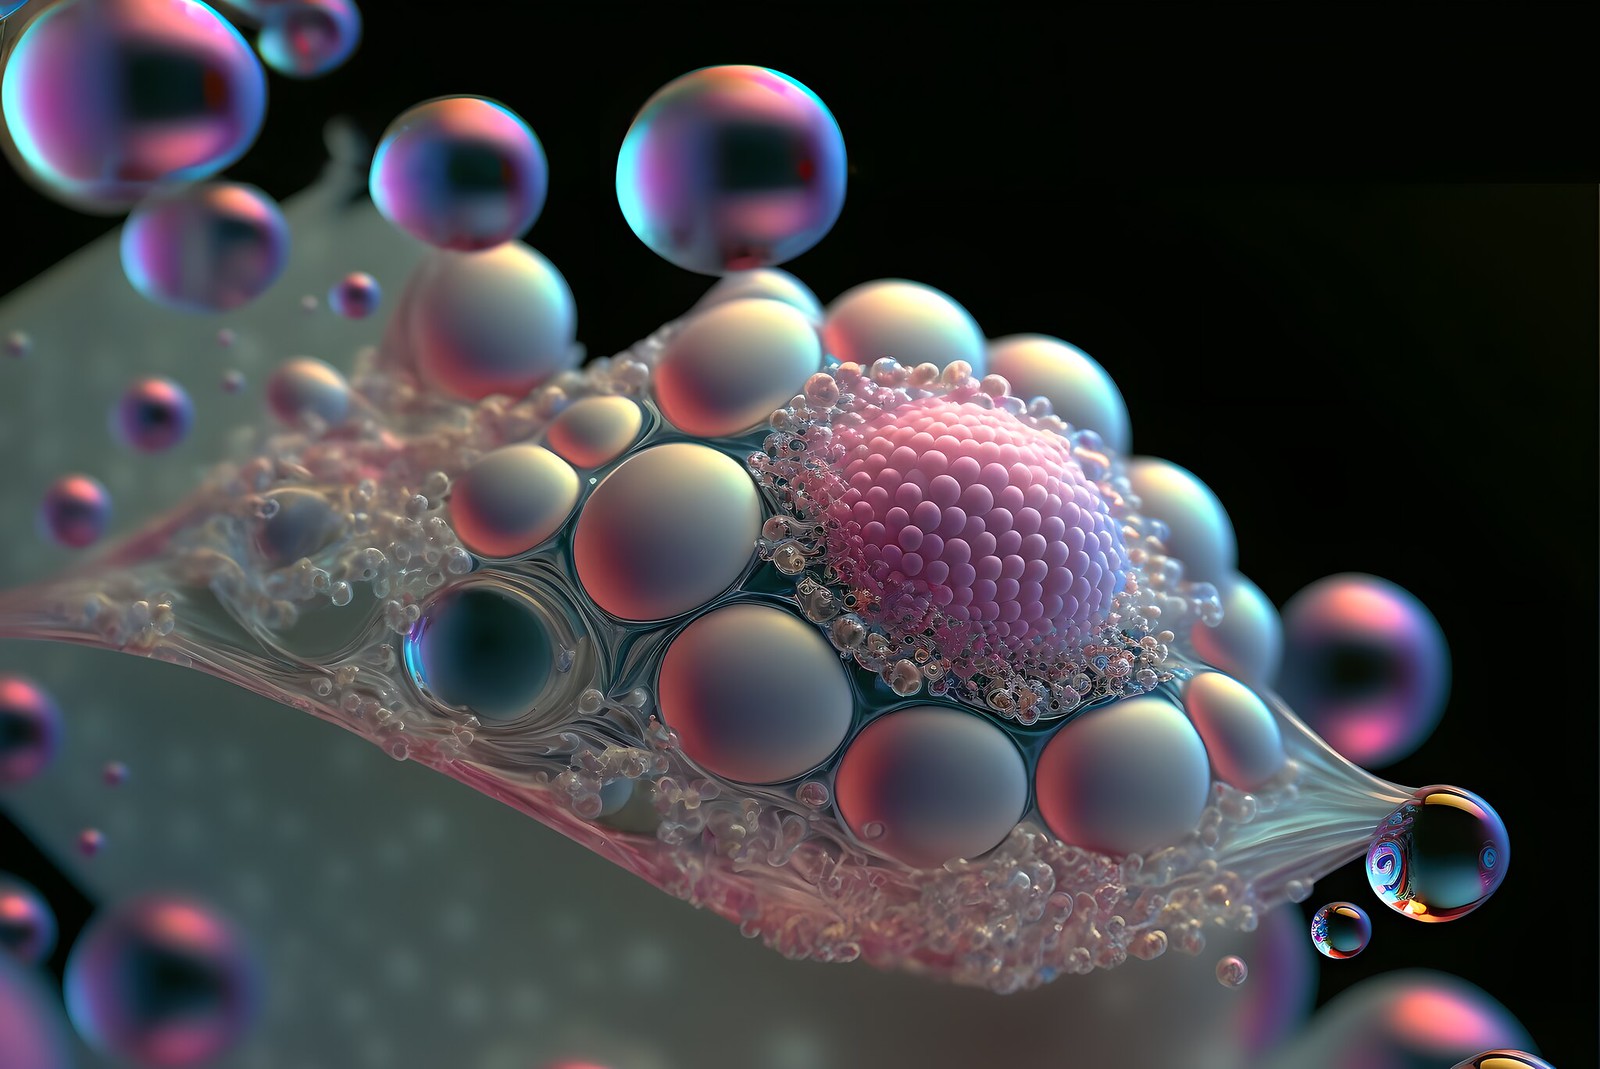 ‘aBiogenesis’ Reimagines the Primordial Soup Theory in a Mesmerizing Animation by Markos Kay